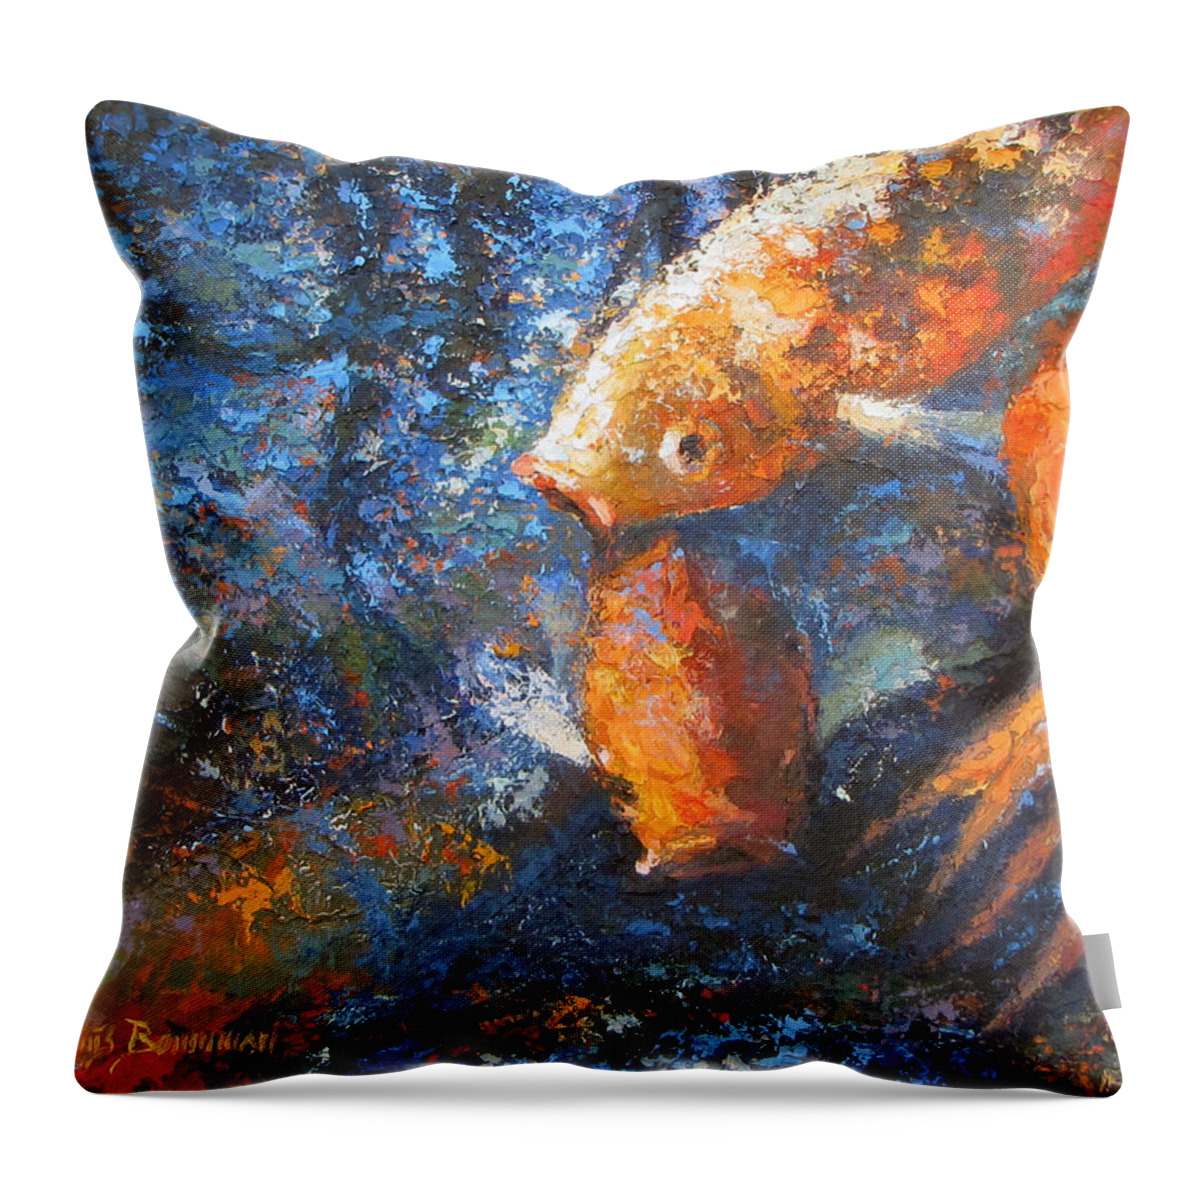 Oil Painting Throw Pillow featuring the painting Koi by Lewis Bowman